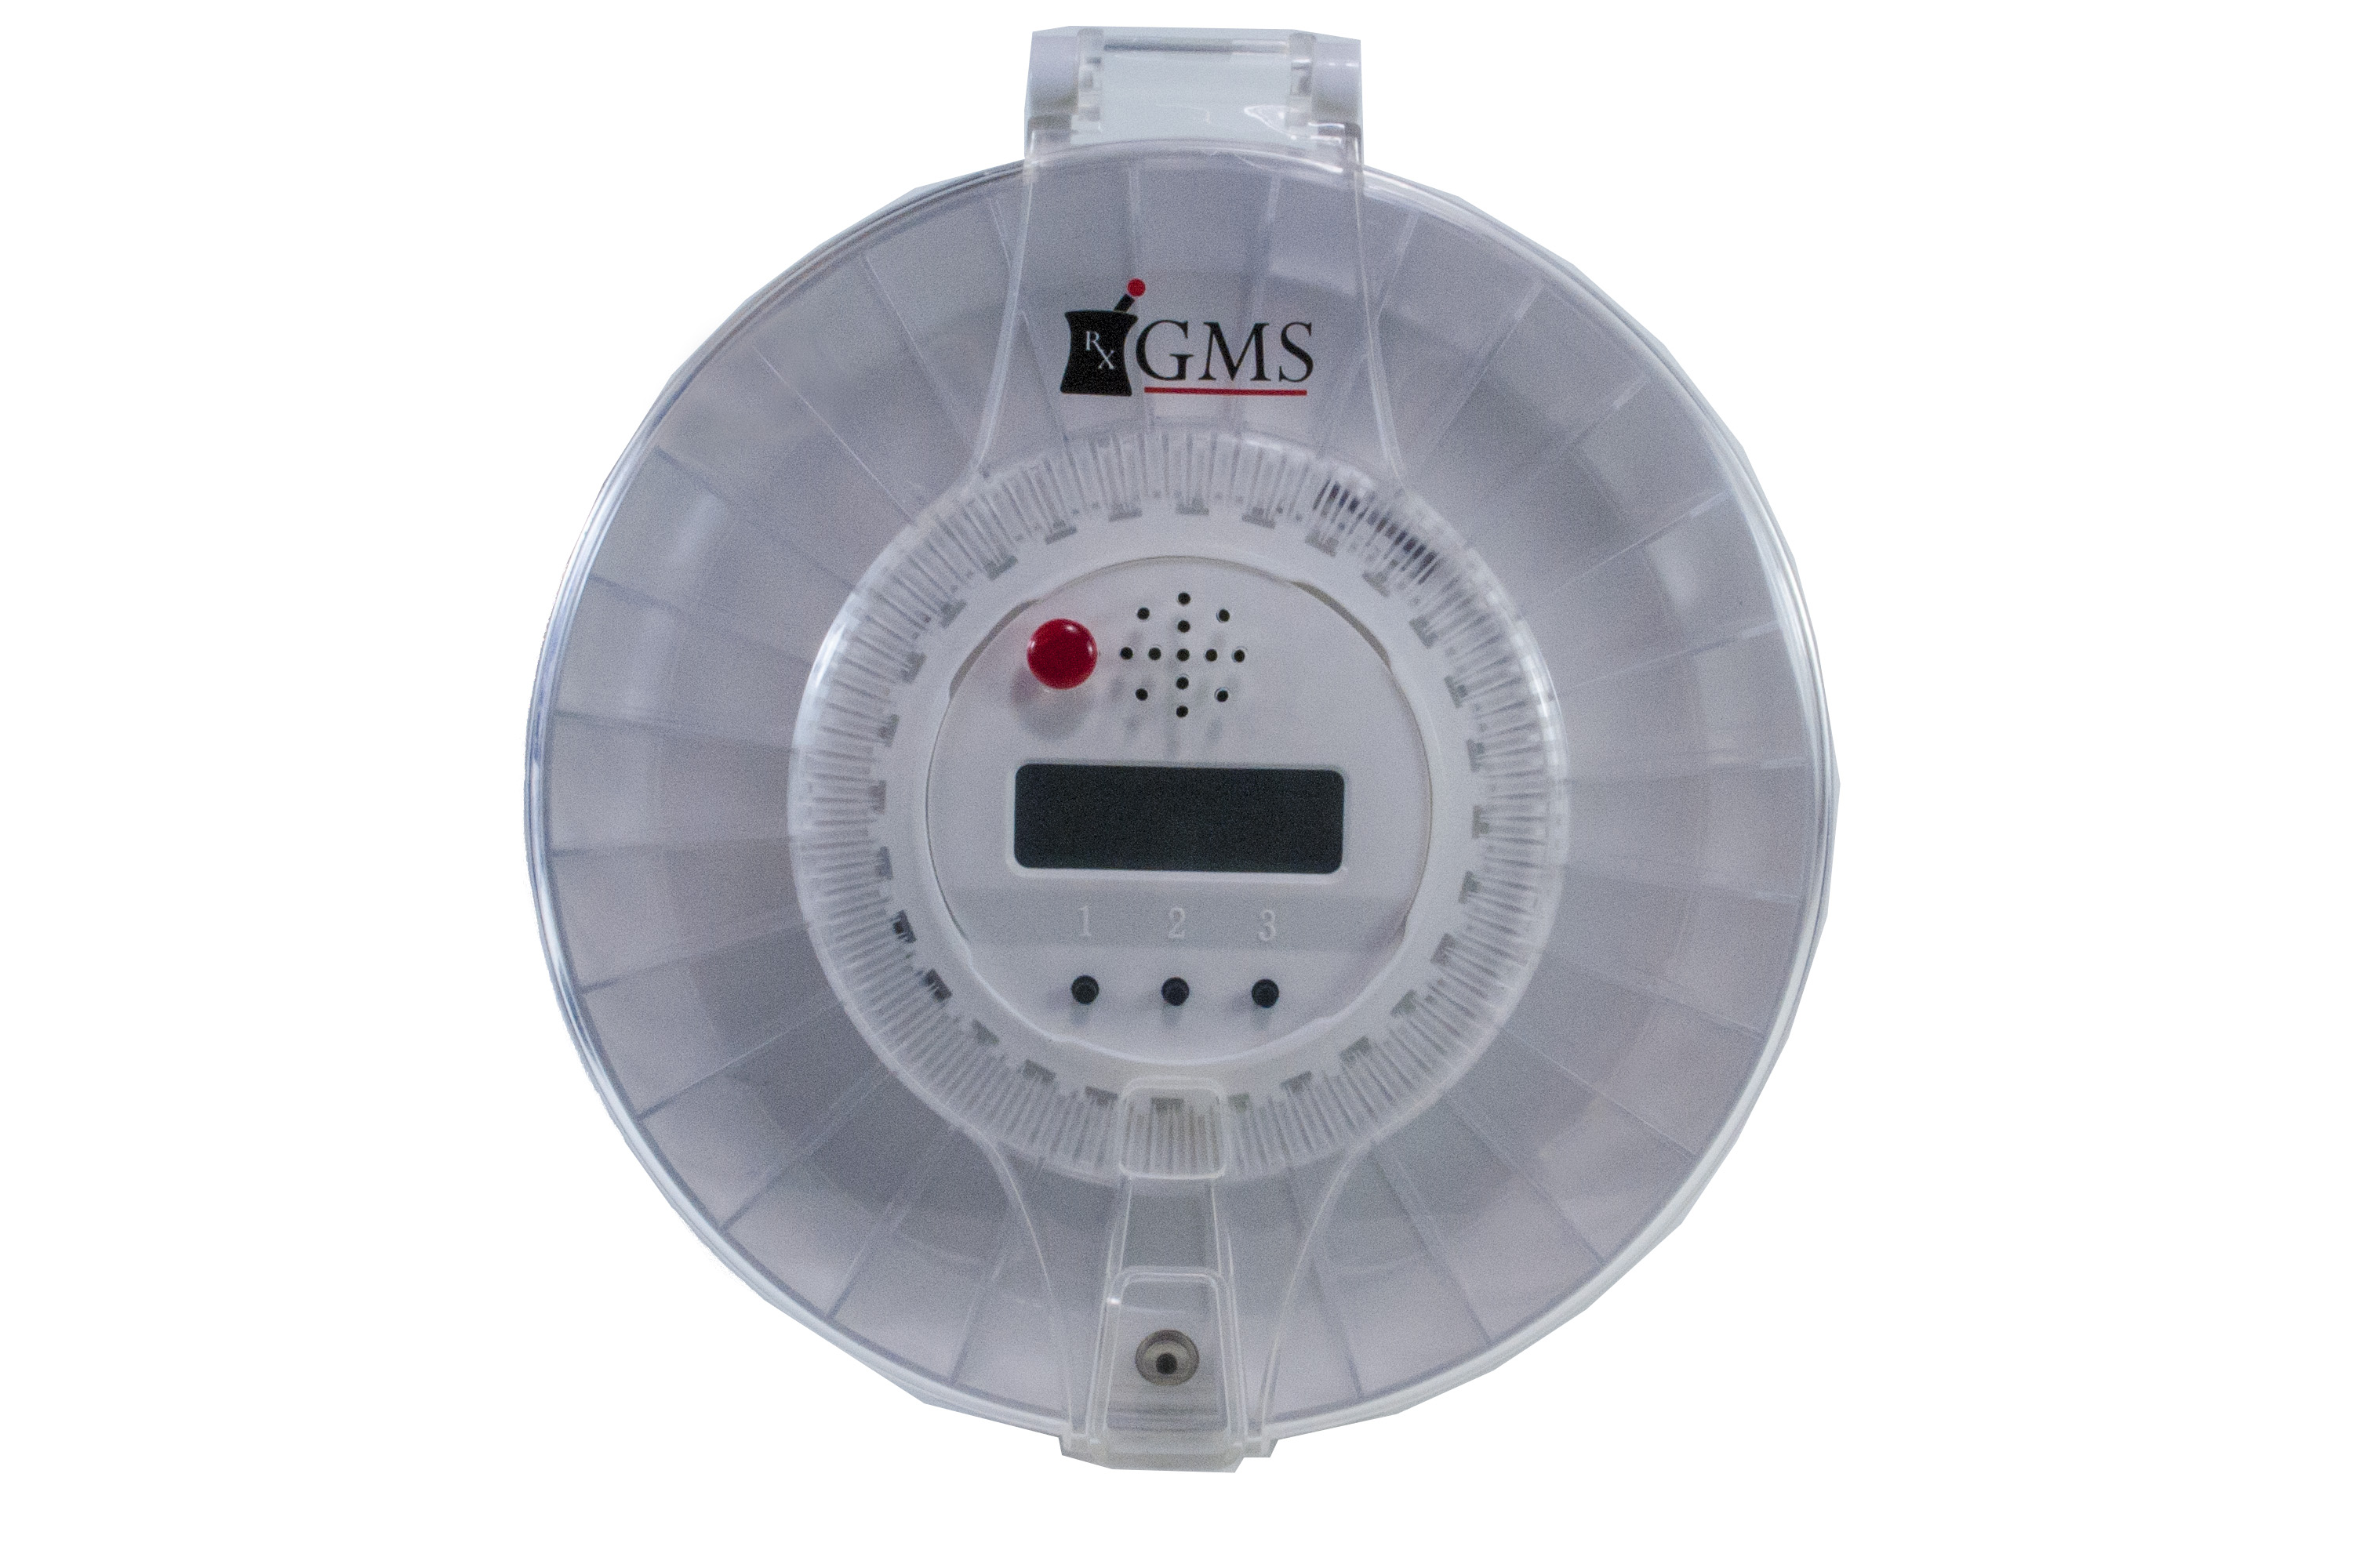 GMS Med-e-lert 28 Day Automatic Pill Dispenser - 6 Alarms  6 Dosage Rings  1 Key (Clear and Solid Lid) - image 5 of 6